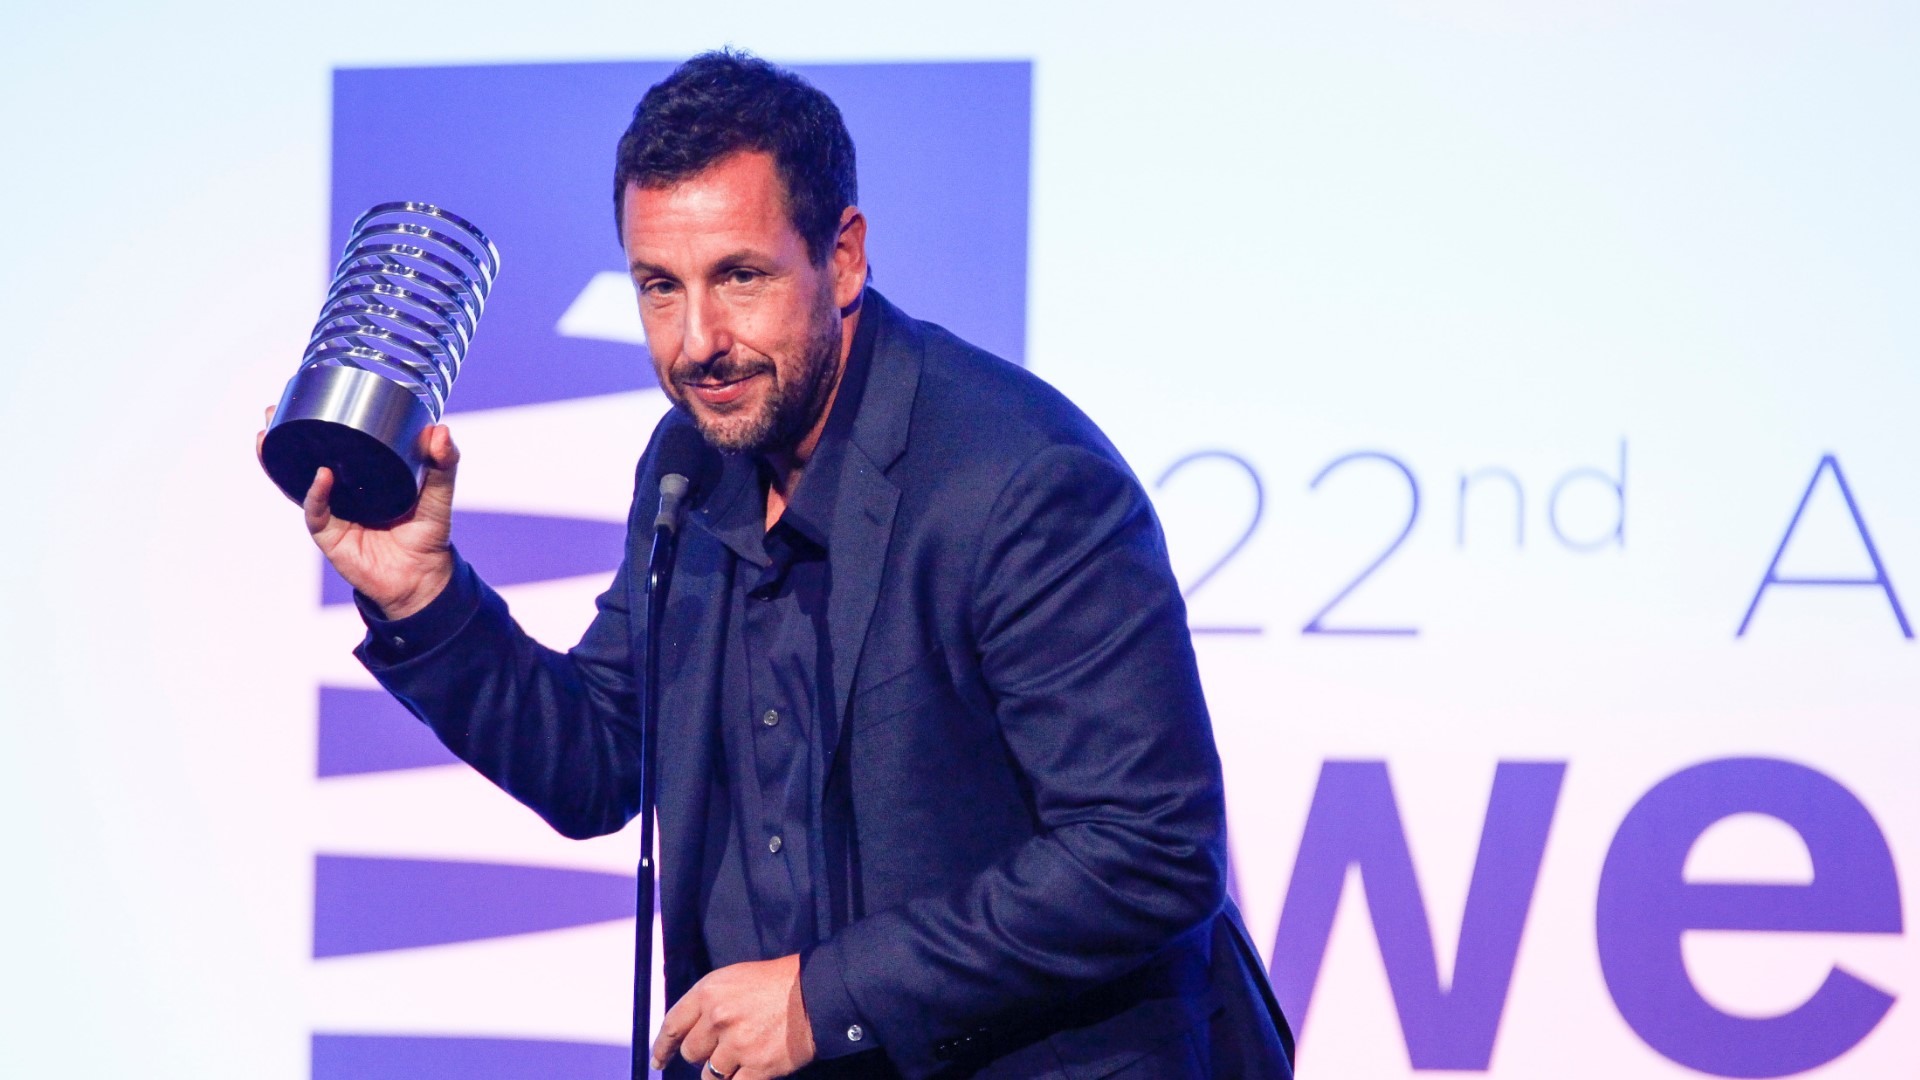 Adam Sandler is bringing standup comedy tour to Amalie Arena in Tampa